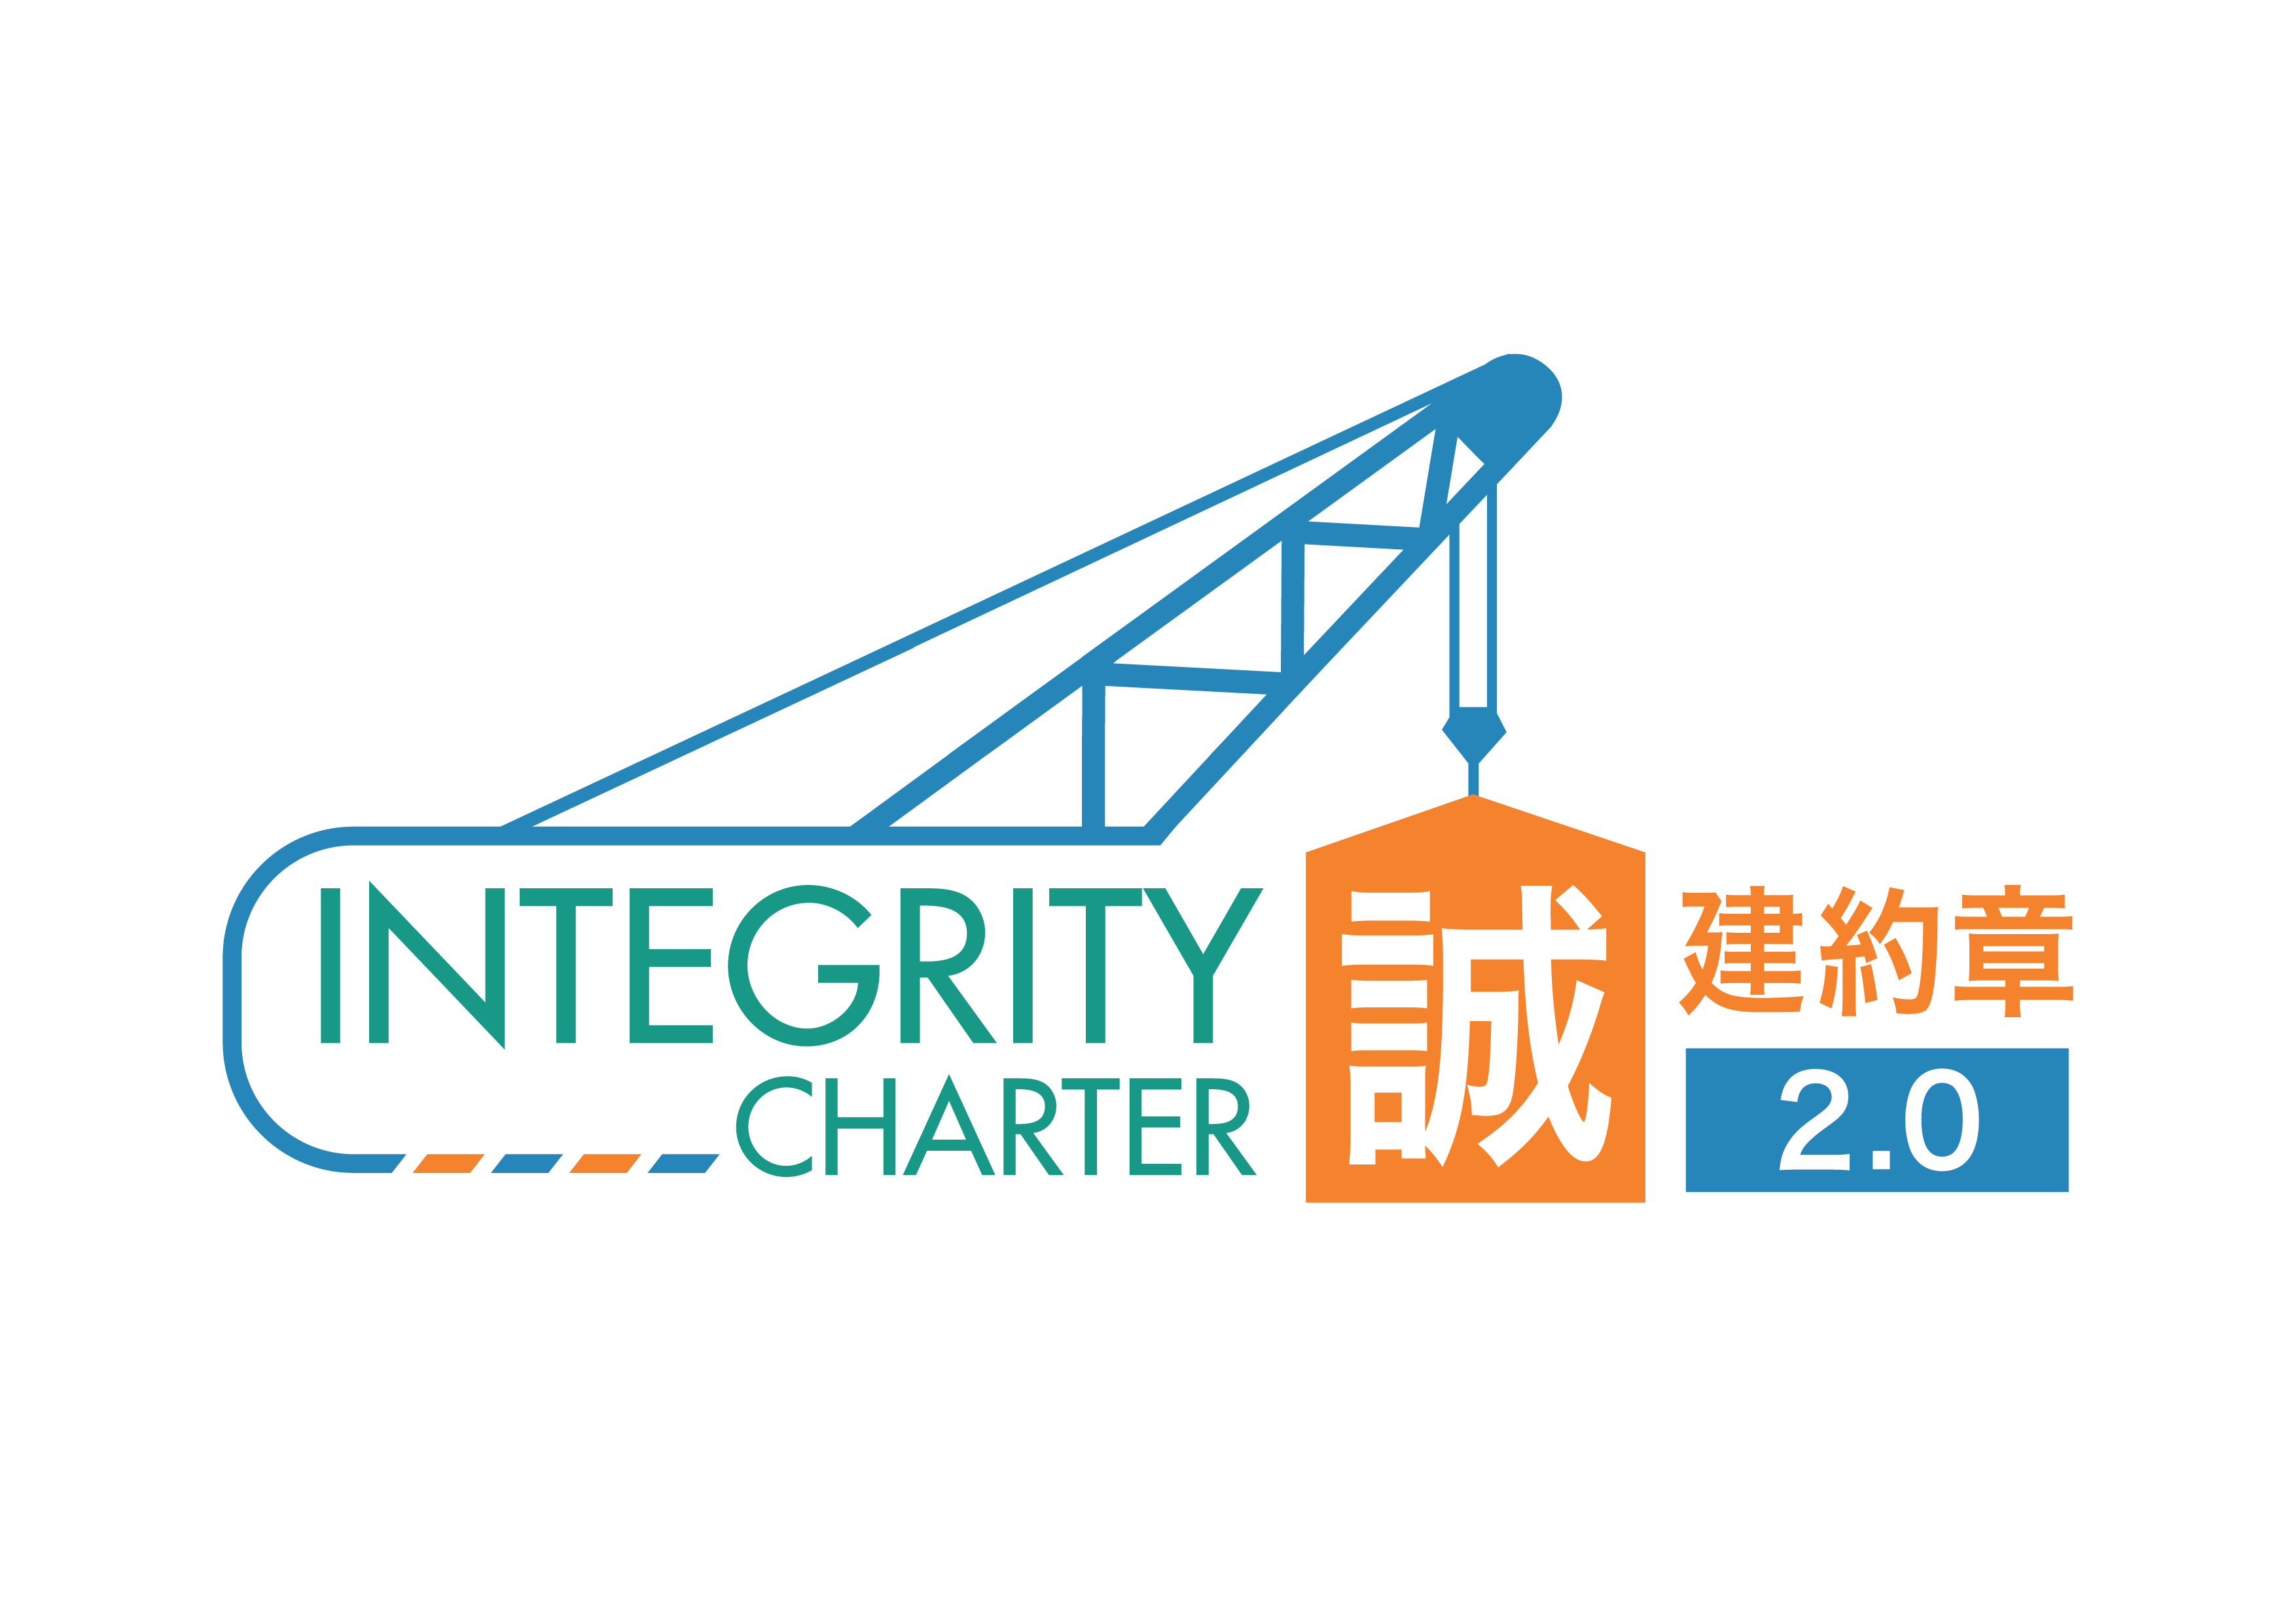 Guideline on the Use of Construction Industry Integrity Charter 2.0 Logo